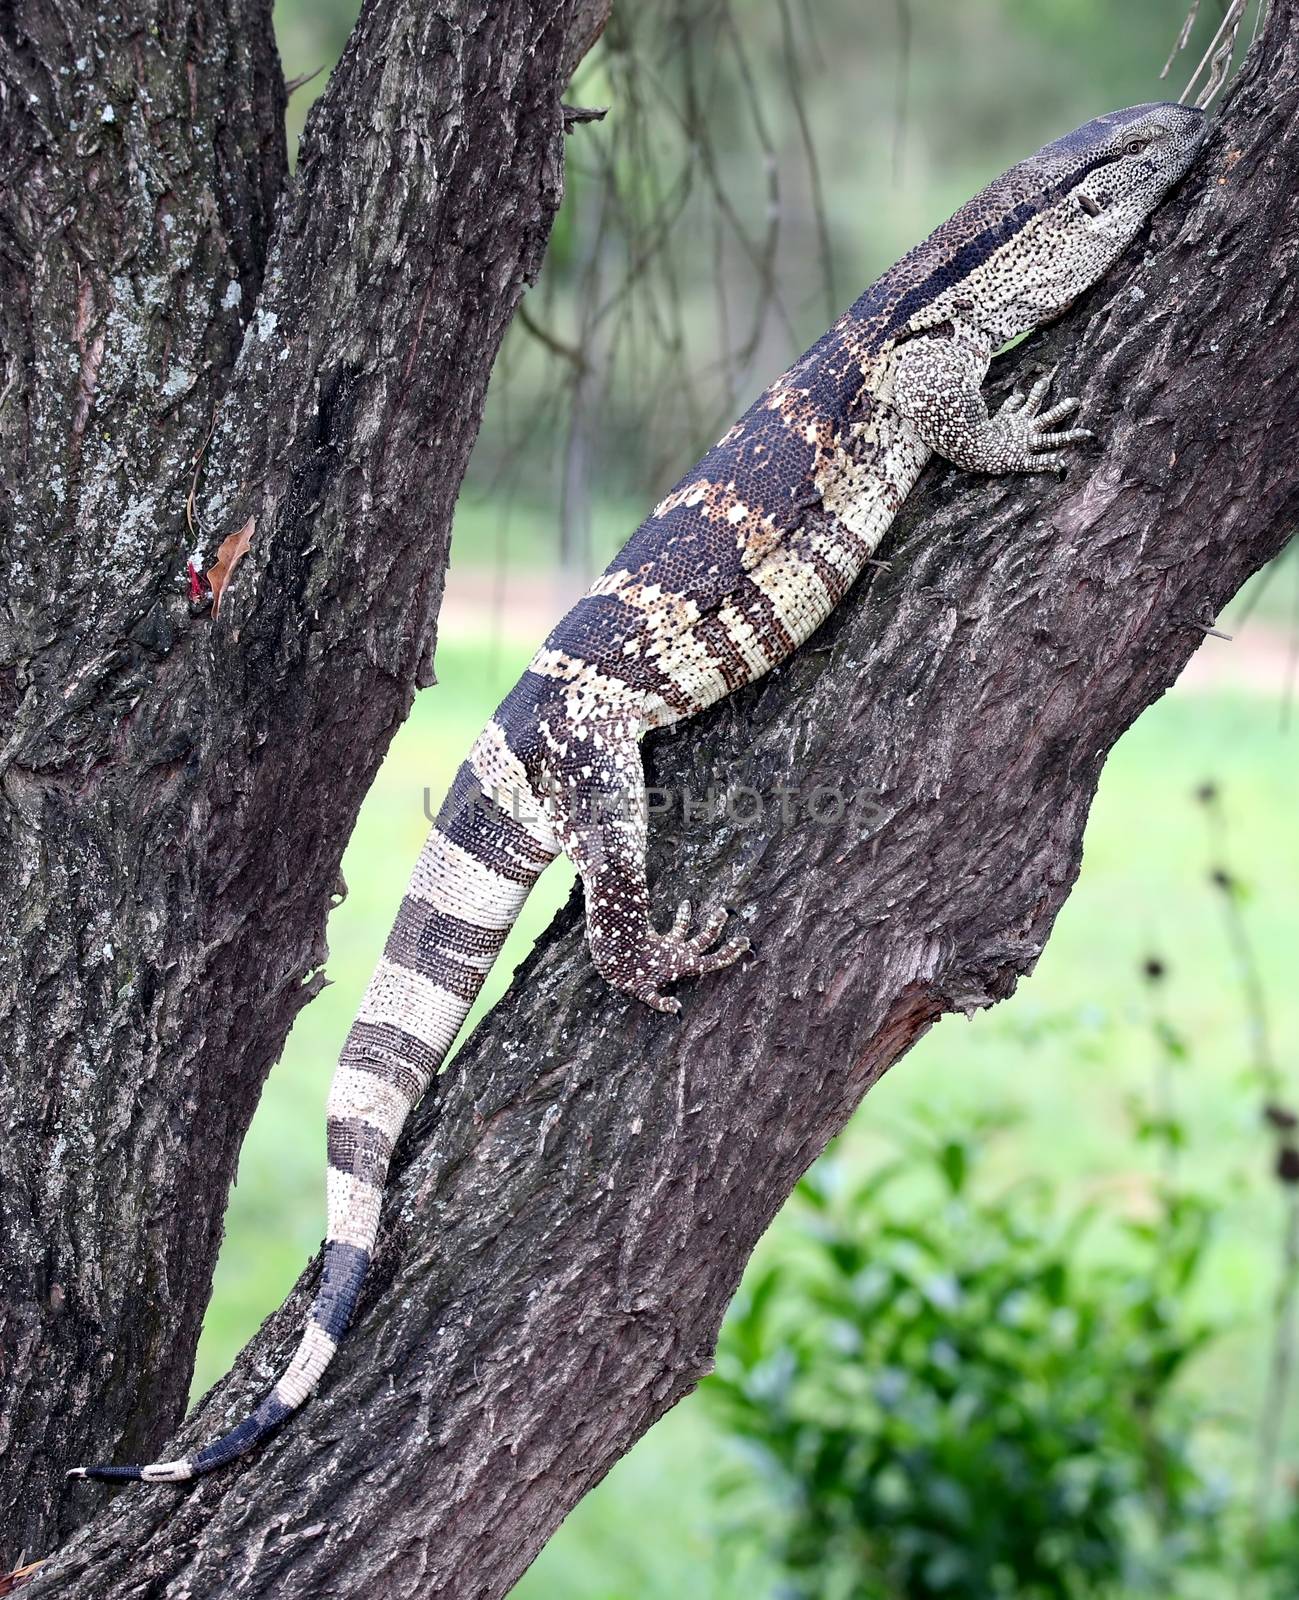 Leguaan or water monitor climbing on a tree branch